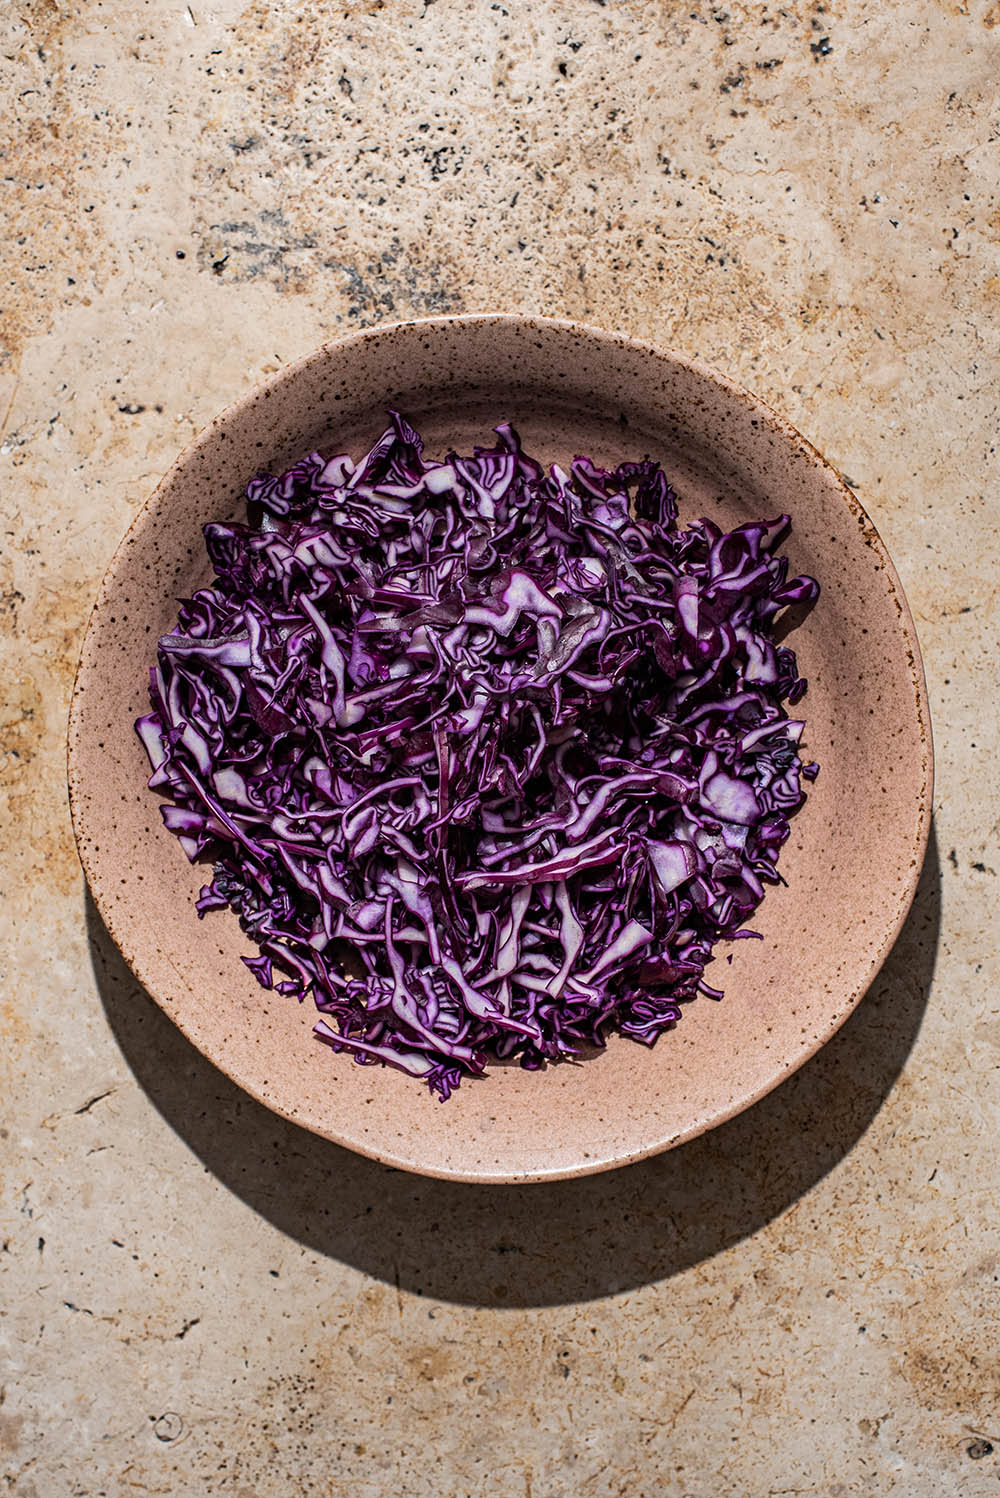 Shredded red cabbage in a bowl.